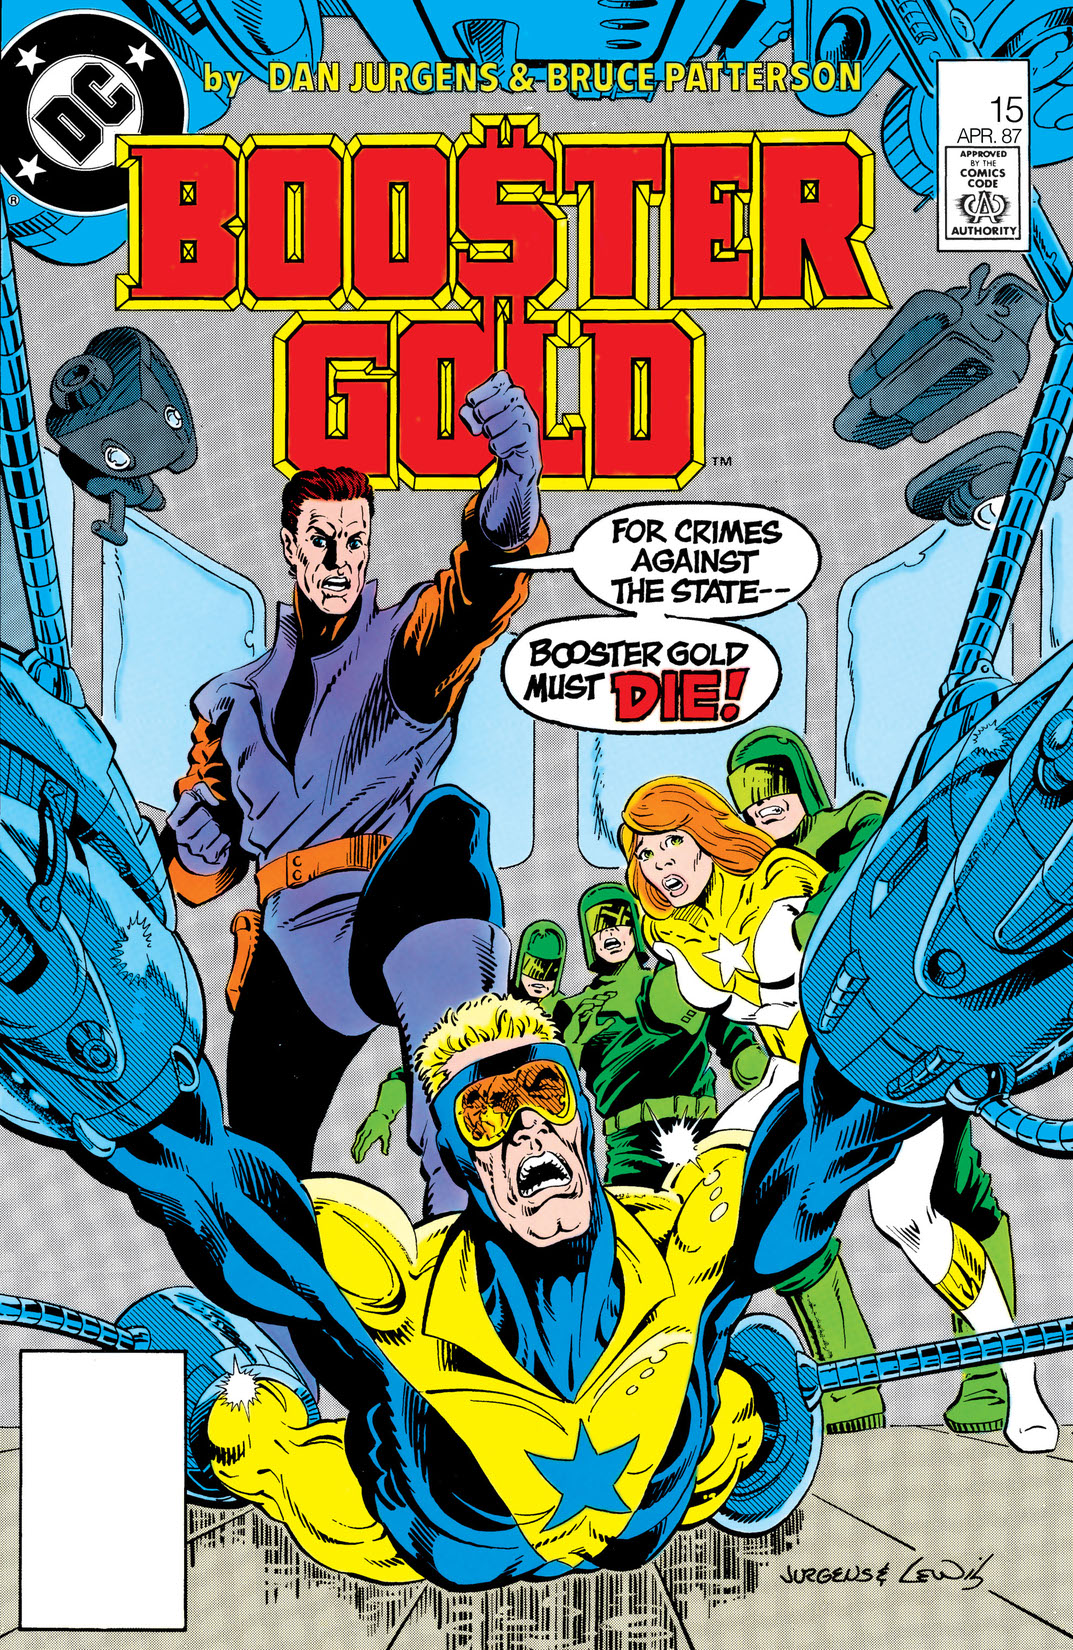 Booster Gold (1985-) #15 preview images